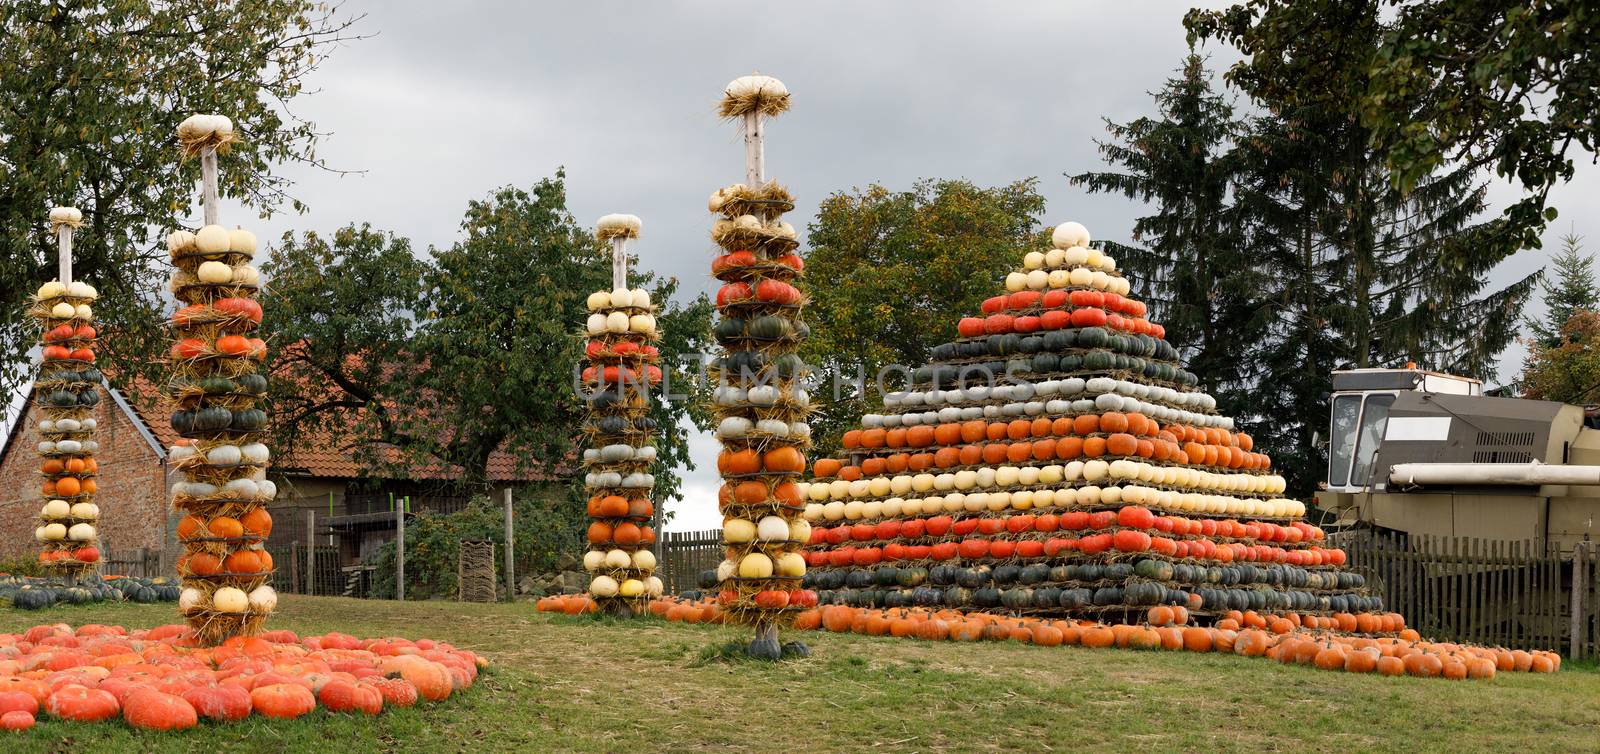 Autumn harvested pumpkins arranged for fun like pyramid with color variations. Halloween holiday concept on pumpkin world.